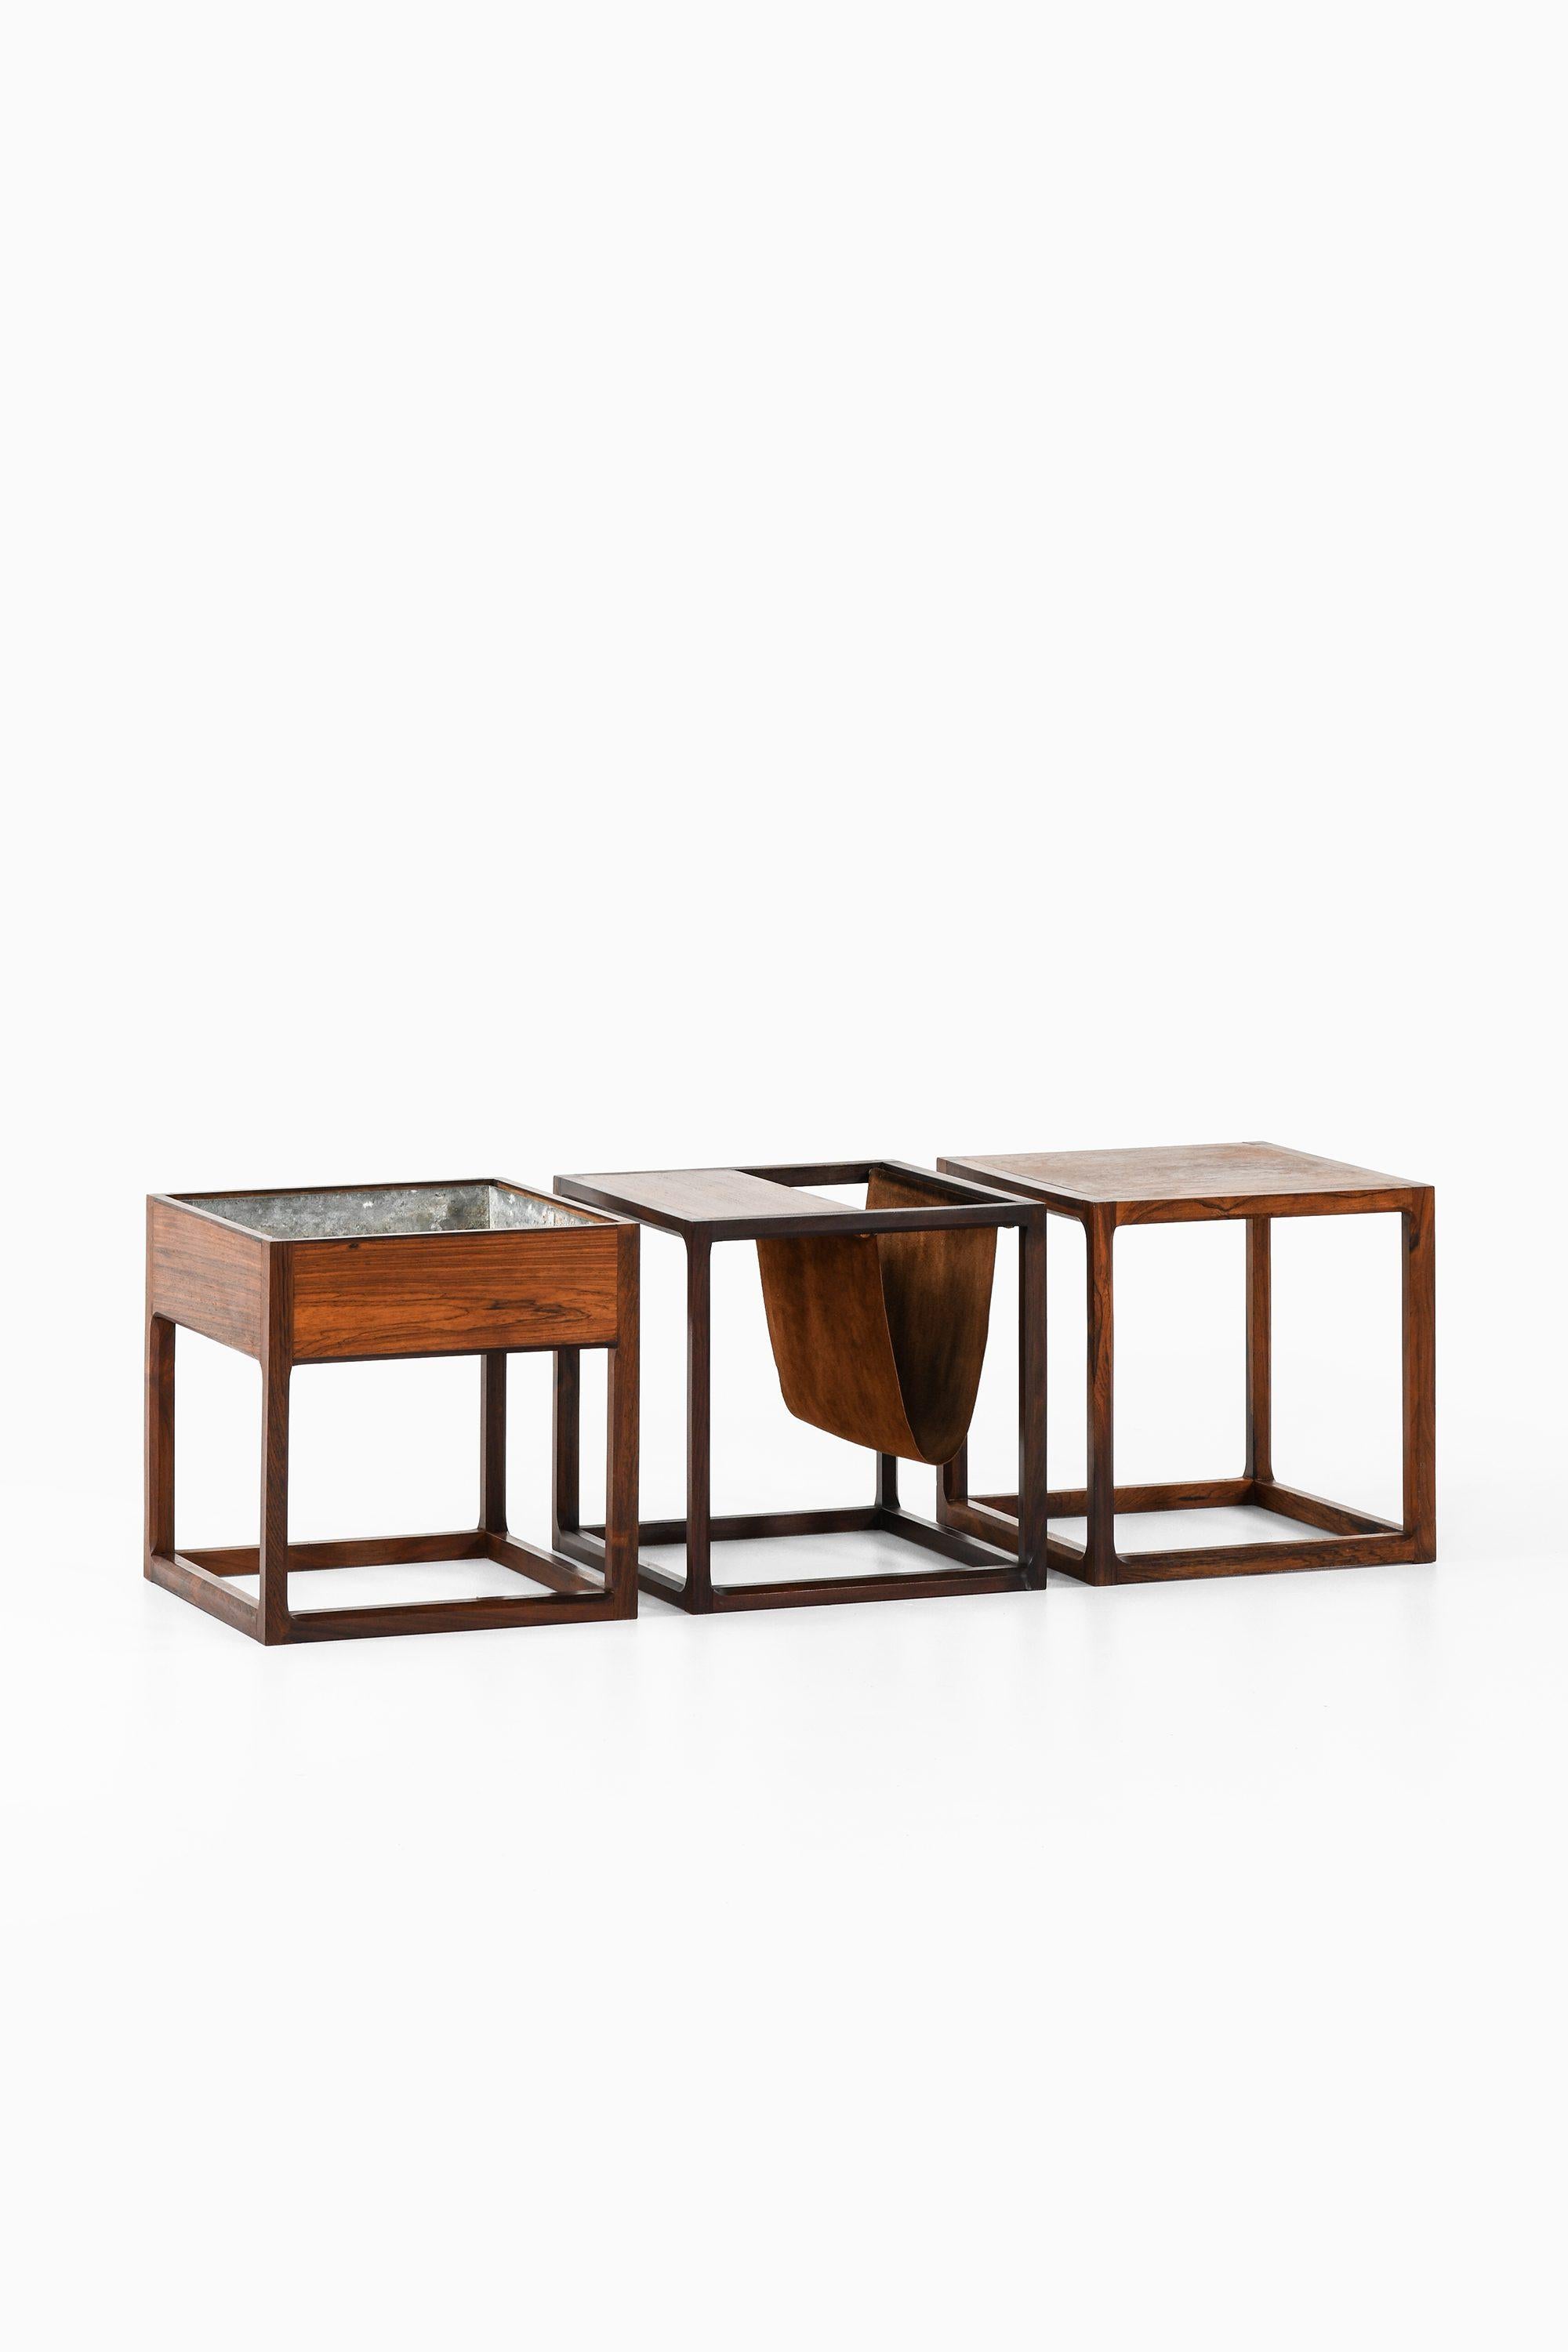 Set of 3 Side Tables in Rosewood, Suede and Zink by Kai Kristiansen, 1960’s

Additional Information:
Material: Rosewood, suede, zink
Style: Mid century, Scandinavian
Produced by Aksel Kjersgaard in Denmark
Dimensions (W x D x H): 44.5 x 44.5 x